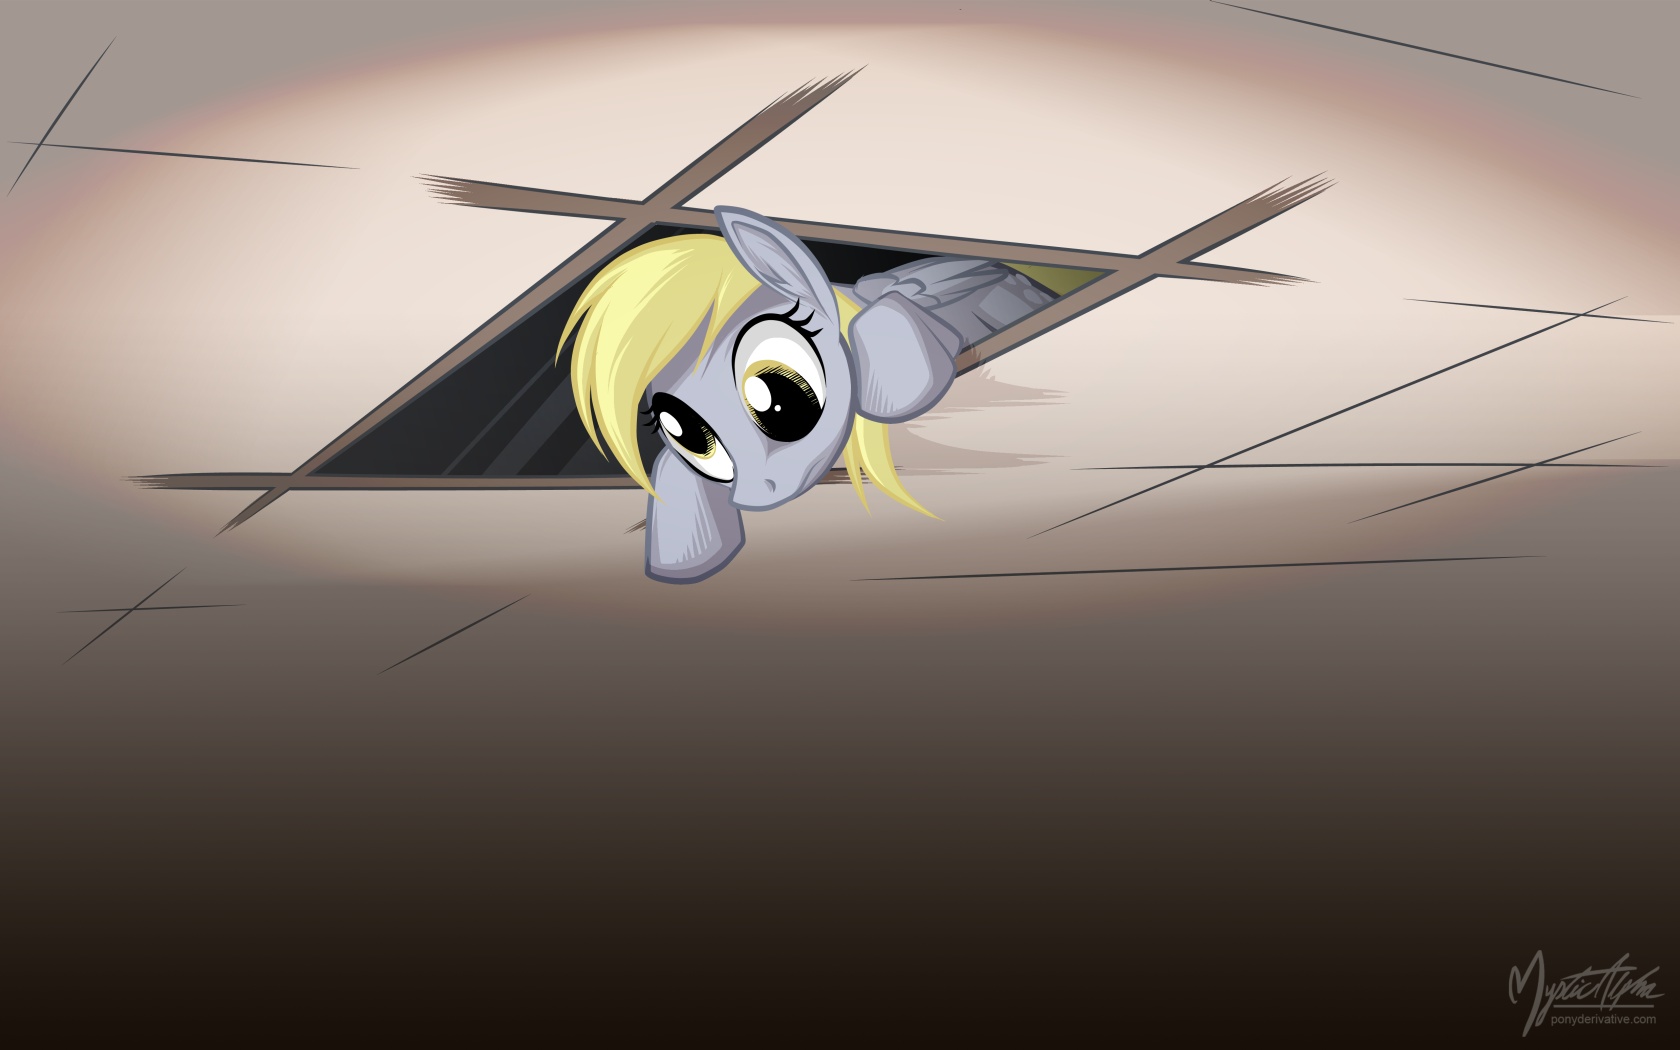 Ceiling Derpy is Watching You by Mysticalpha